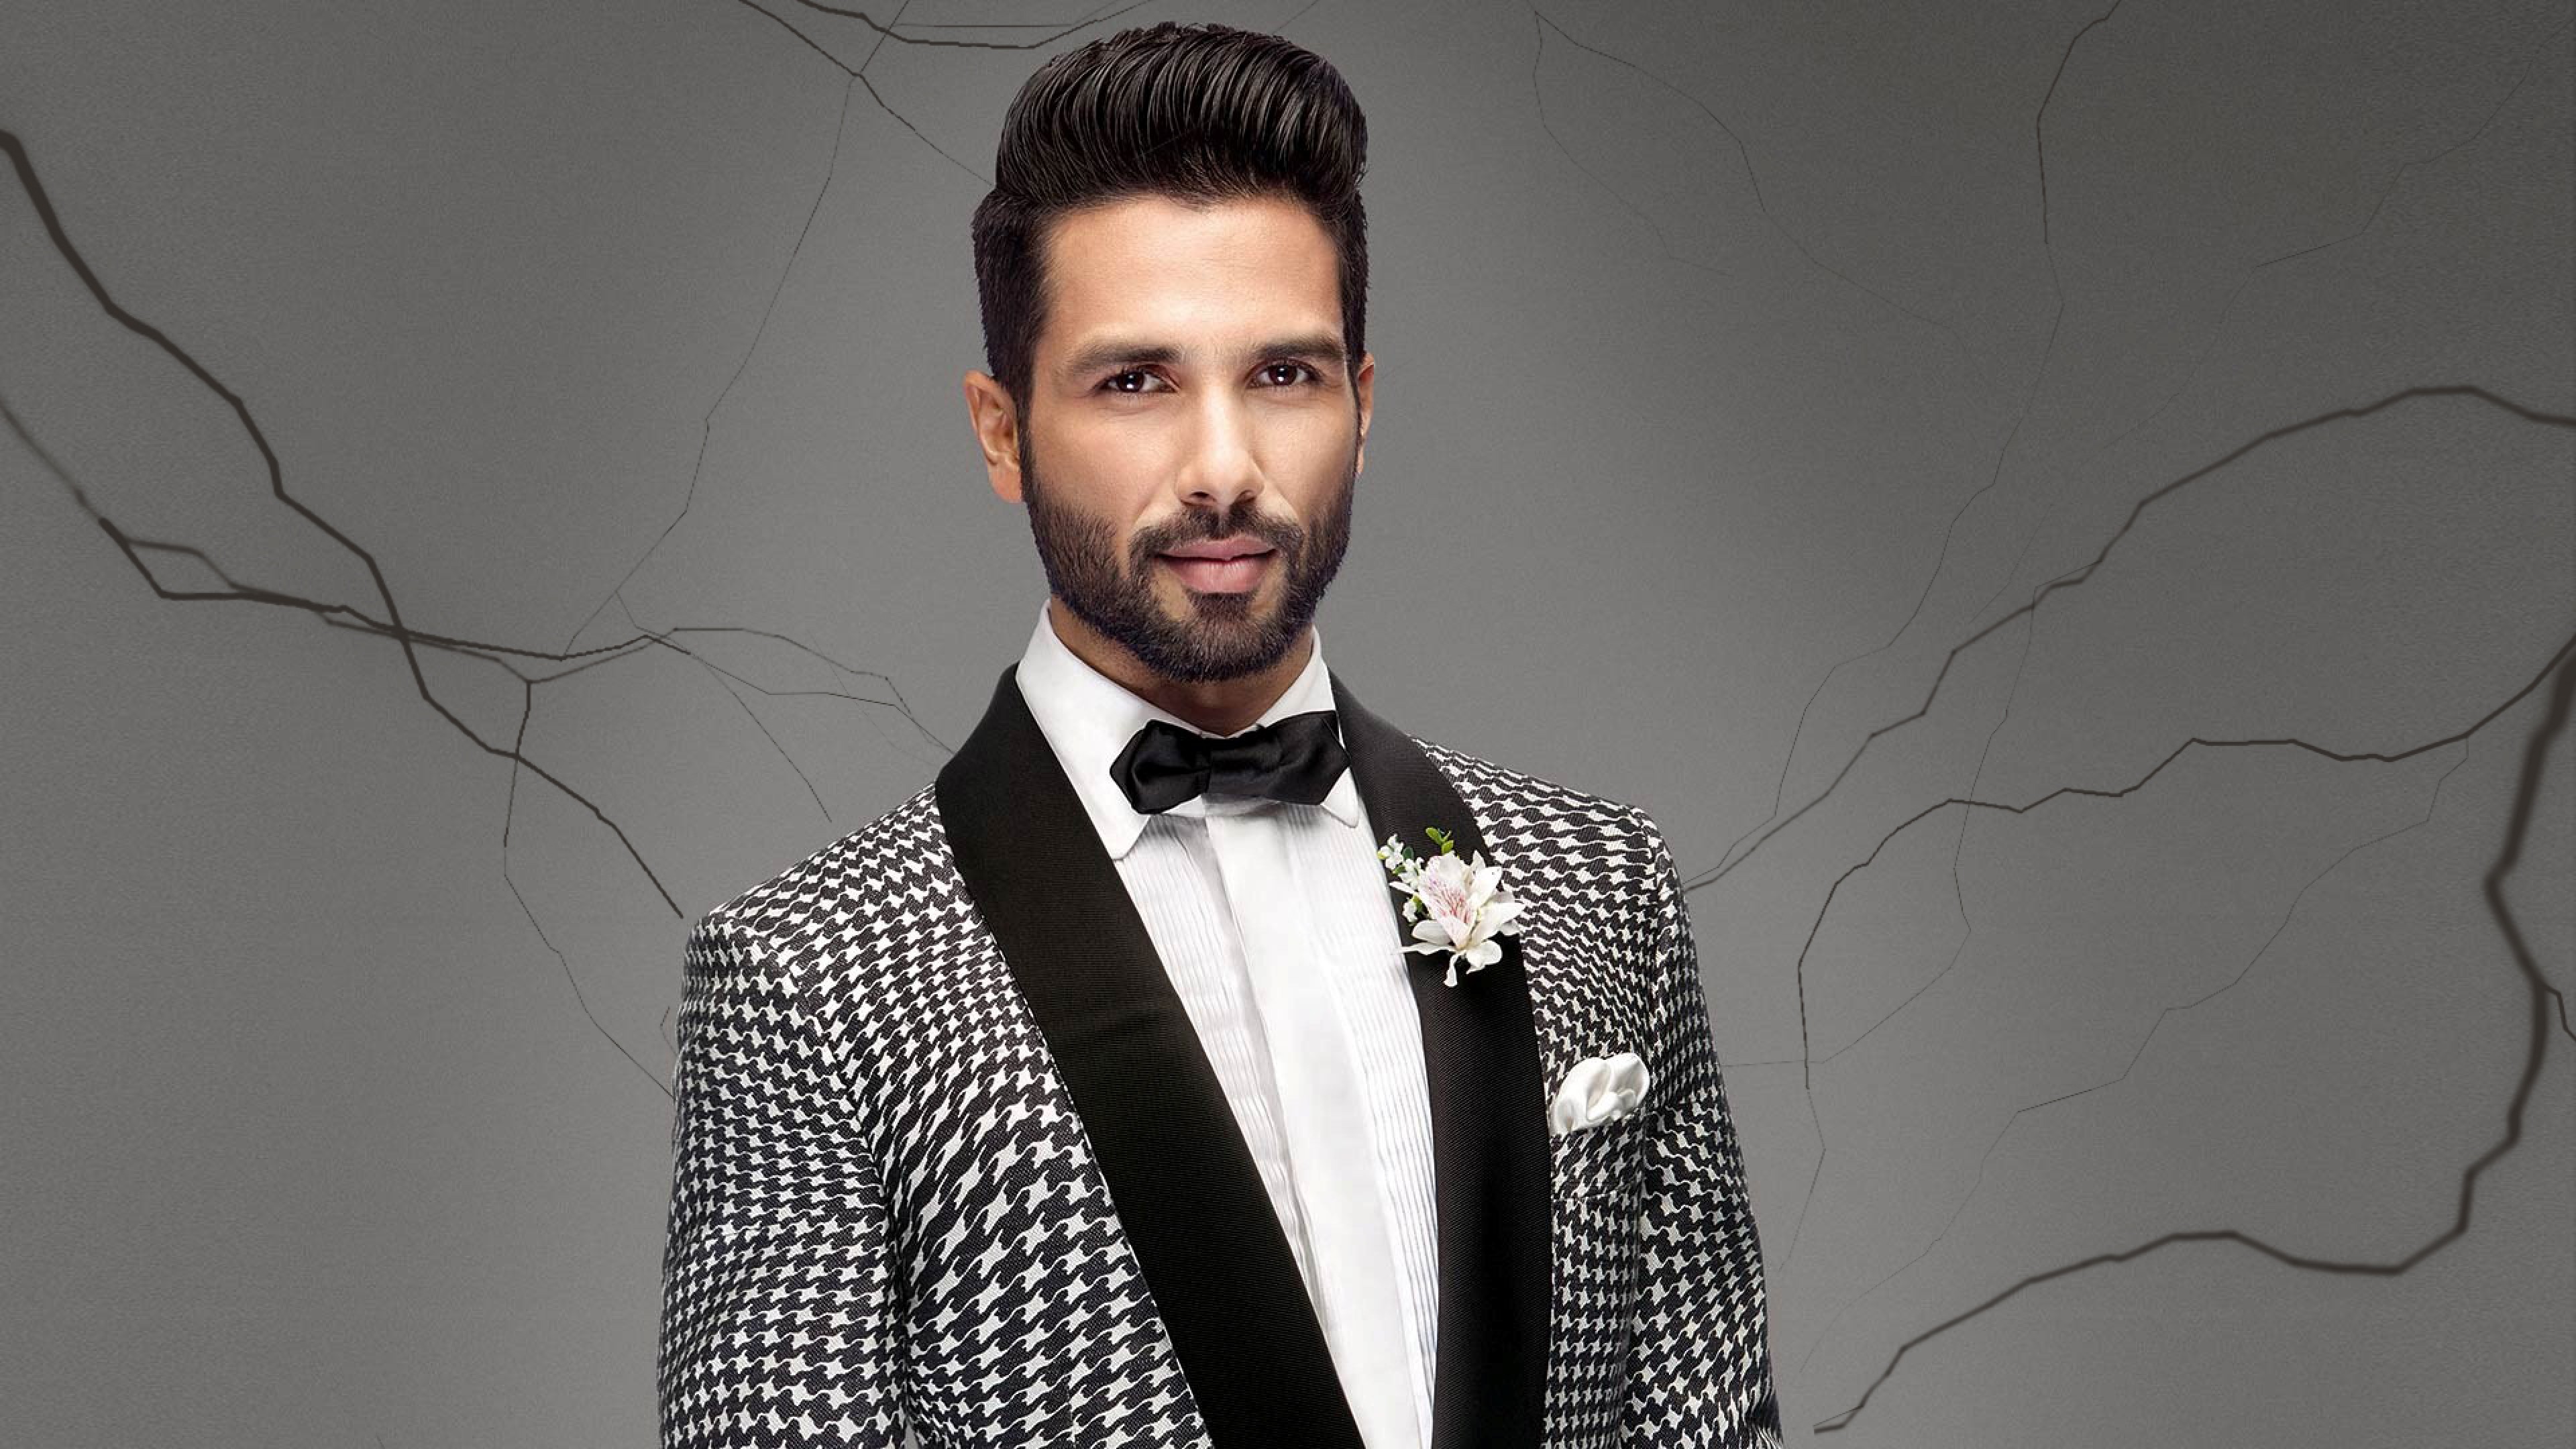 Shahid Kapoor with New Hair Style hd wallpapers  •  4K 5k 8k HD Desktop Wallpapers for Ultra High Definition Widescreen  Desktop, Tablet & Smartphone wallpapers